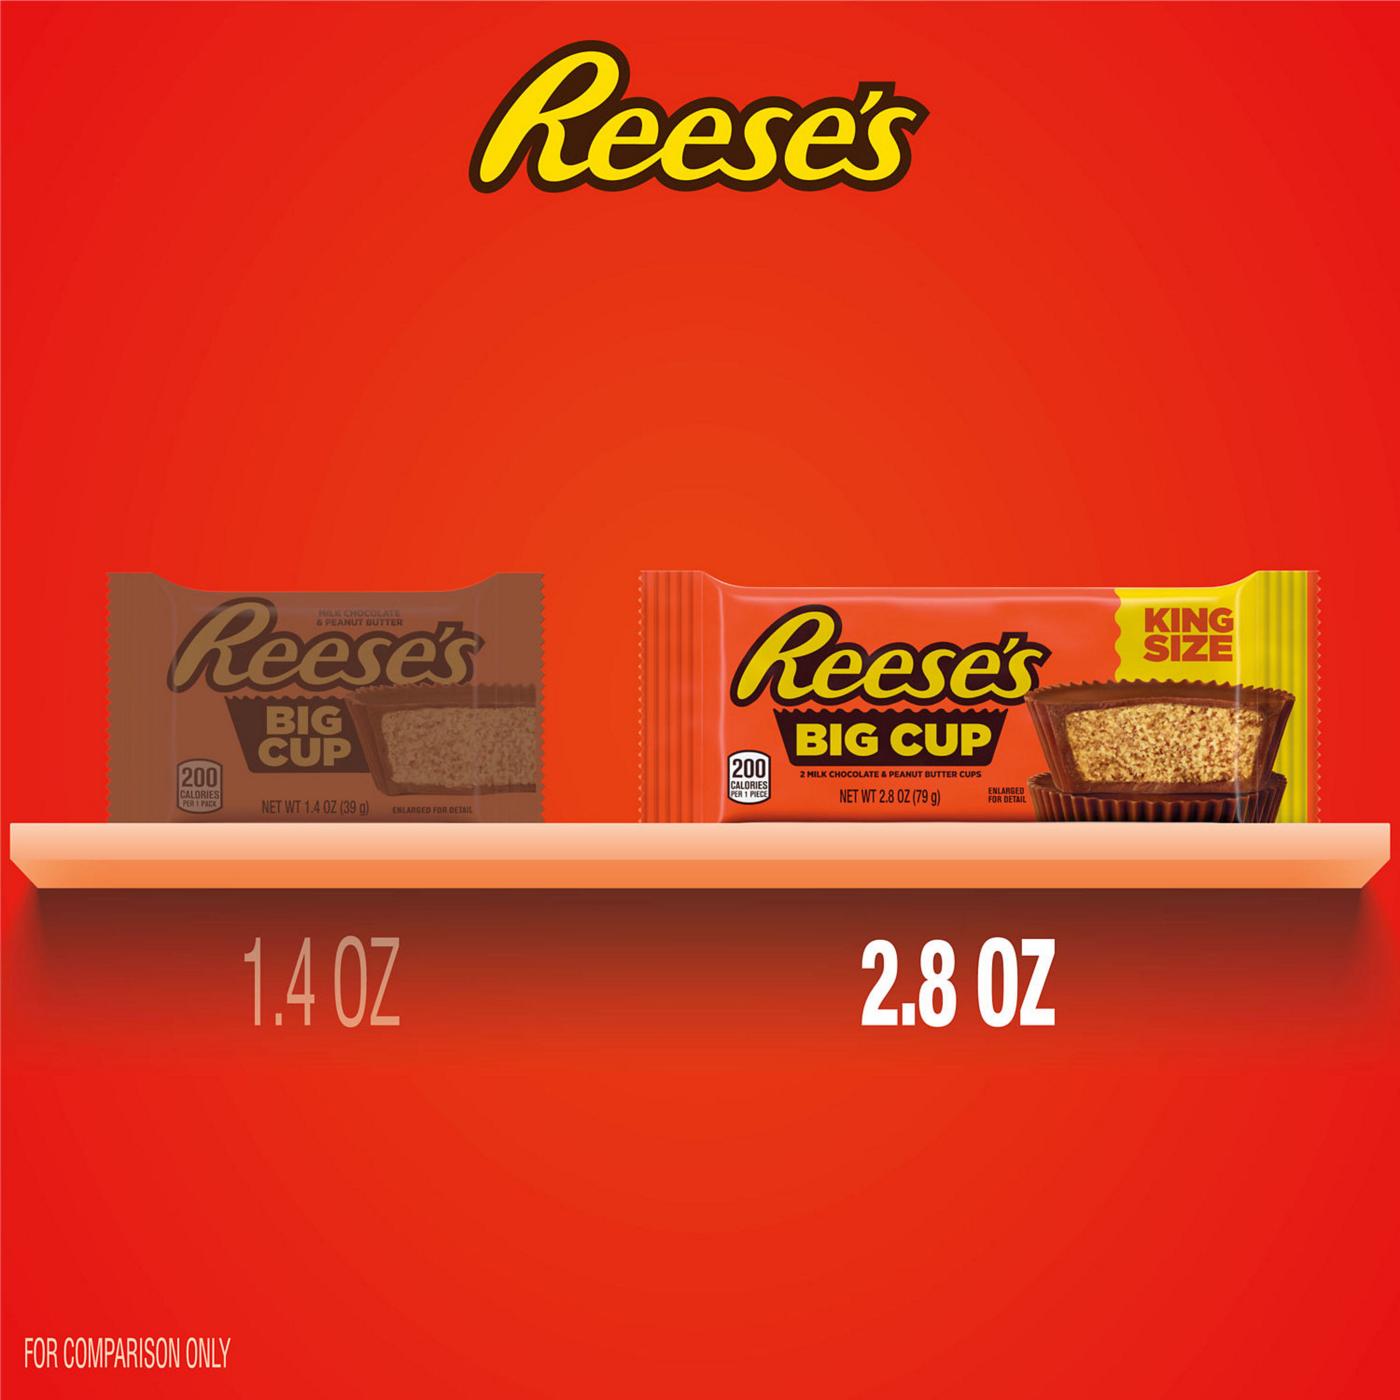 Reese's Big Cup Milk Chocolate Peanut Butter Candy - King Size; image 5 of 7